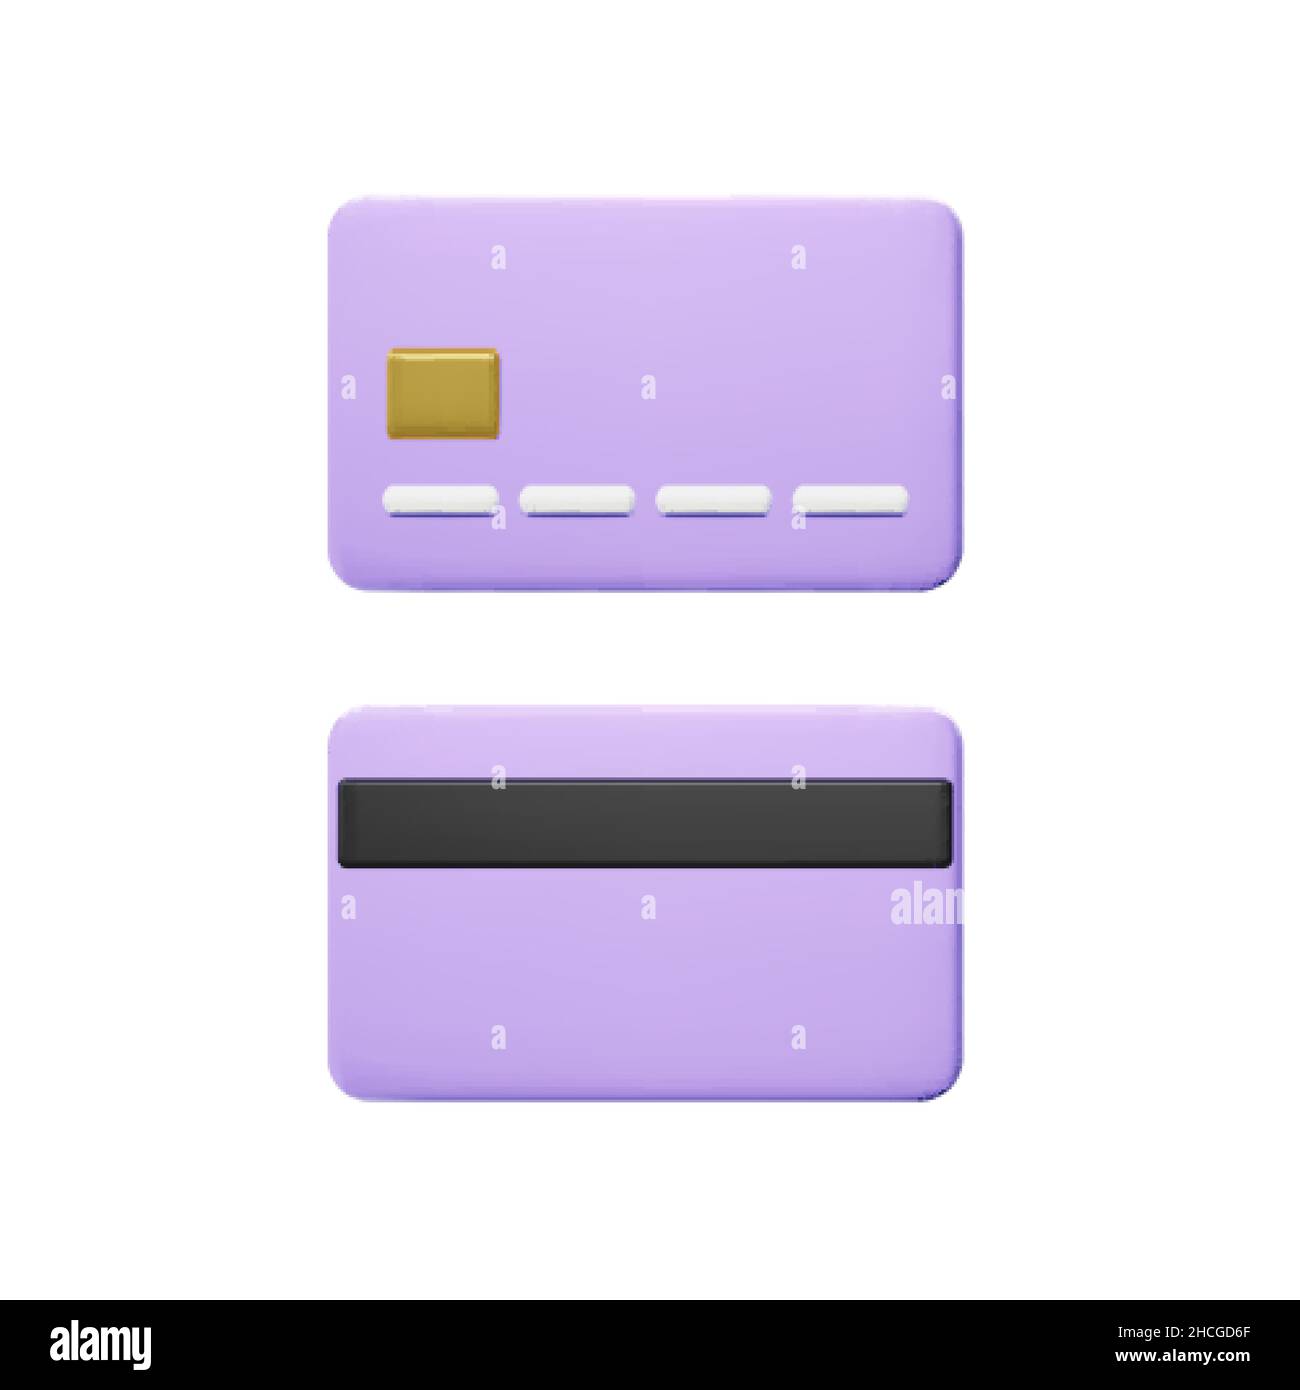 Cartoon style purple credit card front and back view. Banking operation. Financial transactions and payments. Credit card for online payment or shoppi Stock Vector